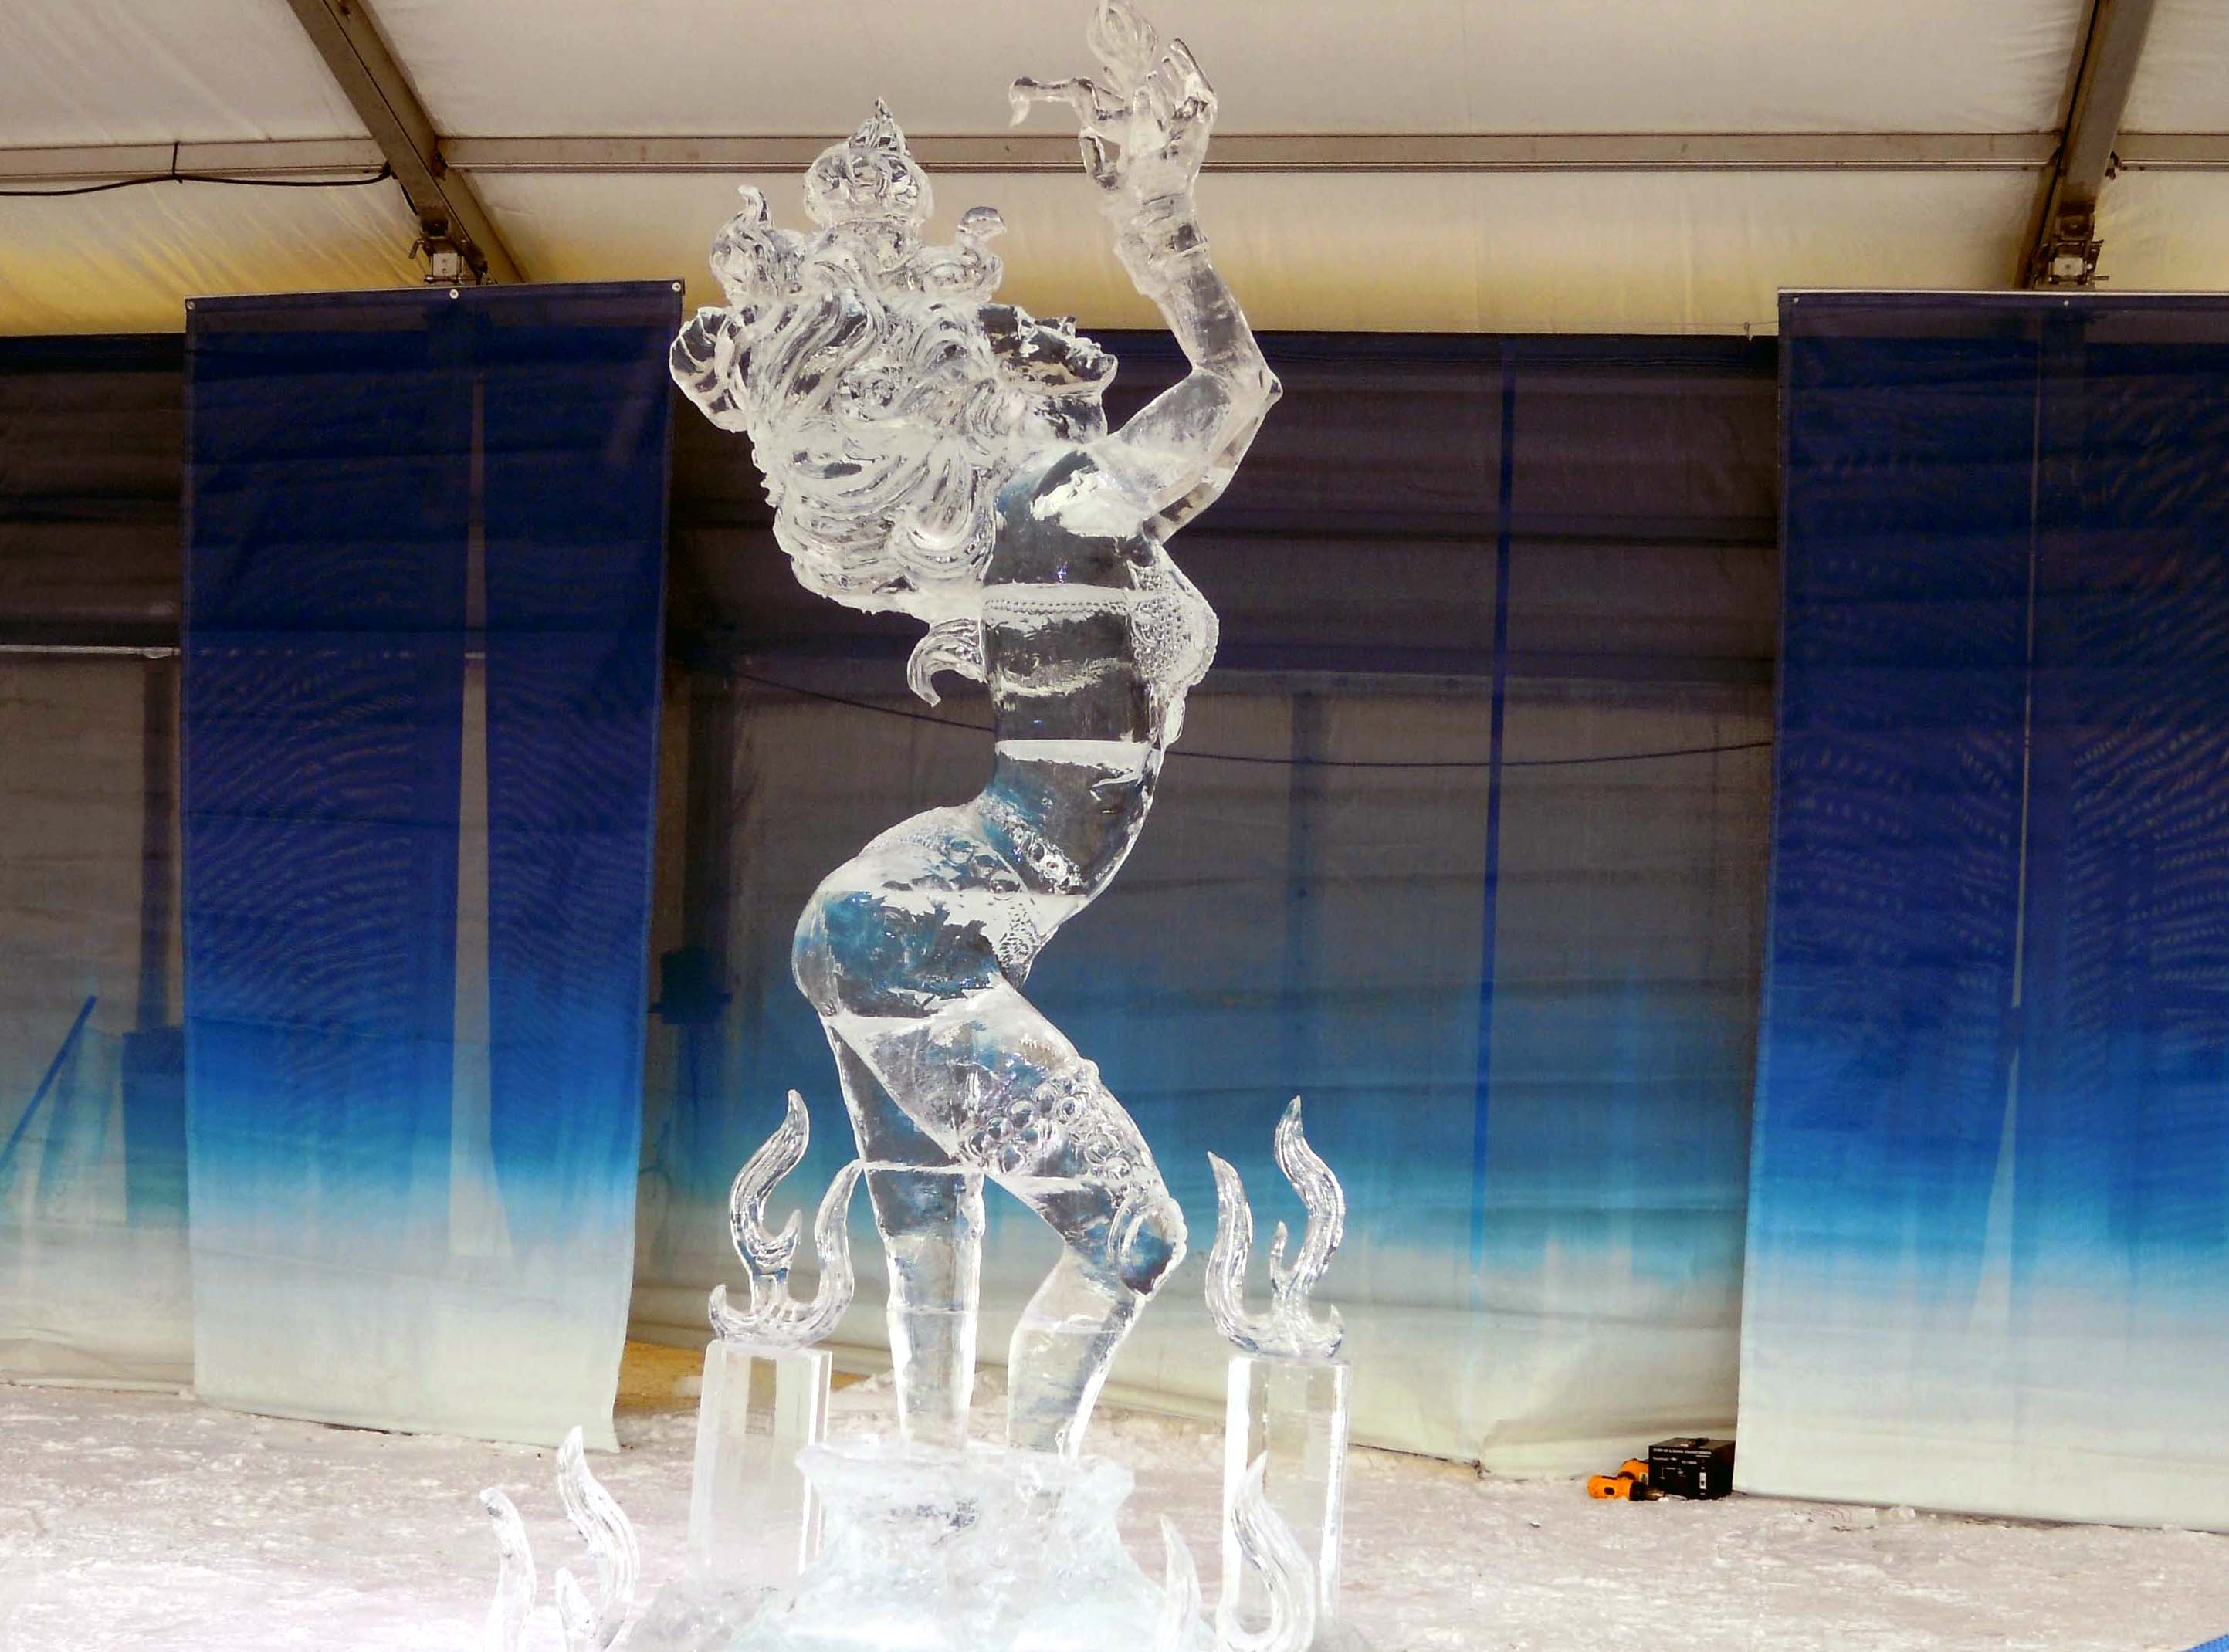 Winterlude Rogers Crystal Garden At Confederation Park Amid A